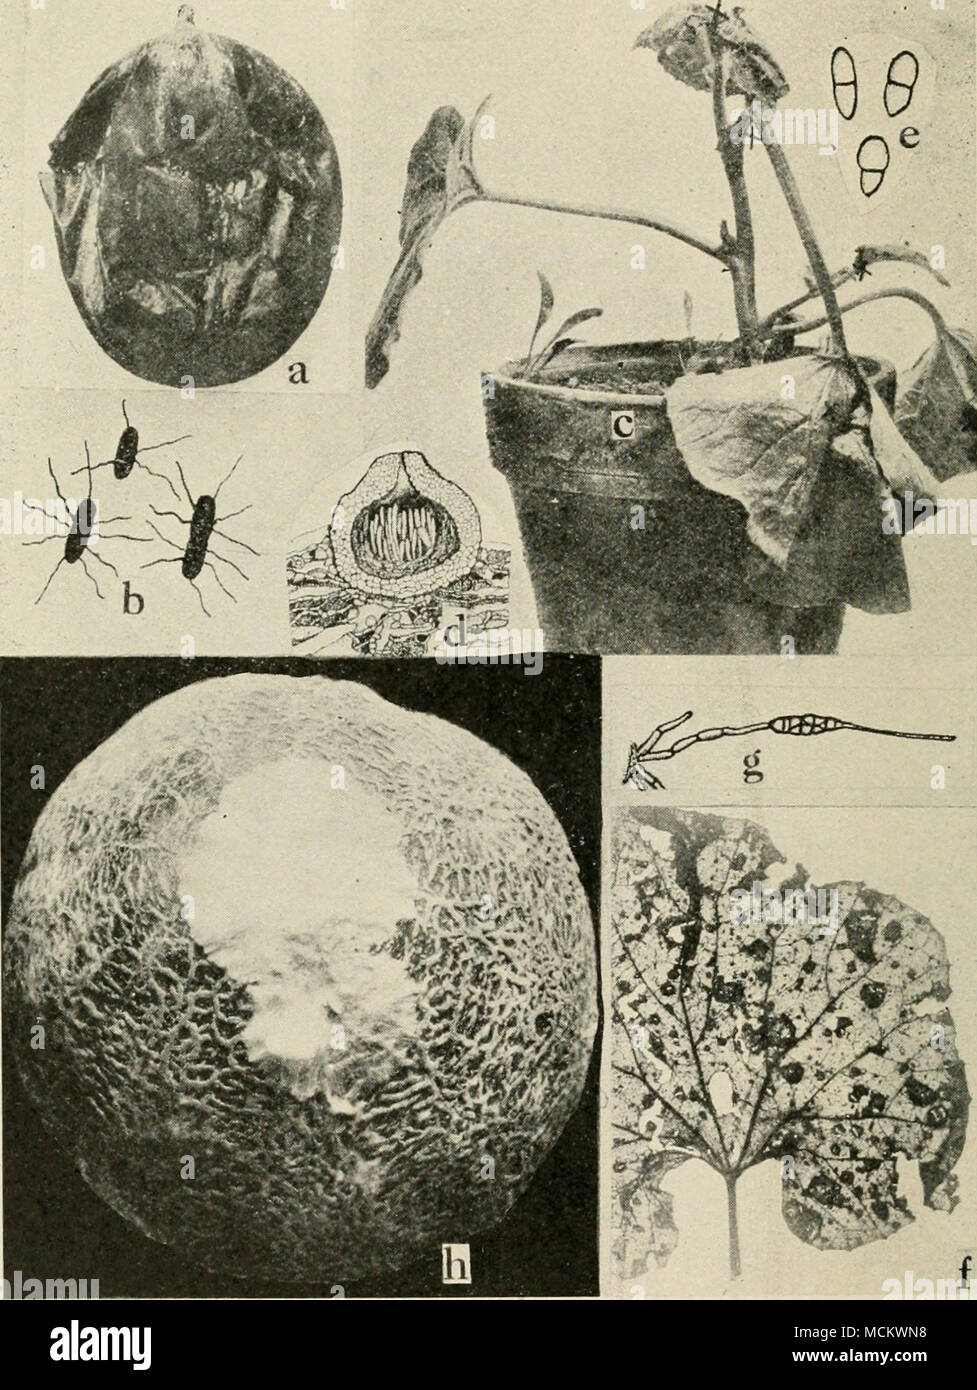 . Fig. 38. Cantaloup Diseases. a. Soft rot, b. individual germs of soft rot (a. and 6. after Giddings), c. young cantaloup plant artificially inoculated with Mycosphasrella wilt, d. section through a perithecium of Mycosphcerella citrullina, showing immature asci, e. ascospores of M. citriiUina (c. to e. after Grossenbacher), /. Alternaria leaf blight, g. Conidiophores and spore of Macrosporium cucumcrinum (after Chester), /;. Southern blight. Stock Photo